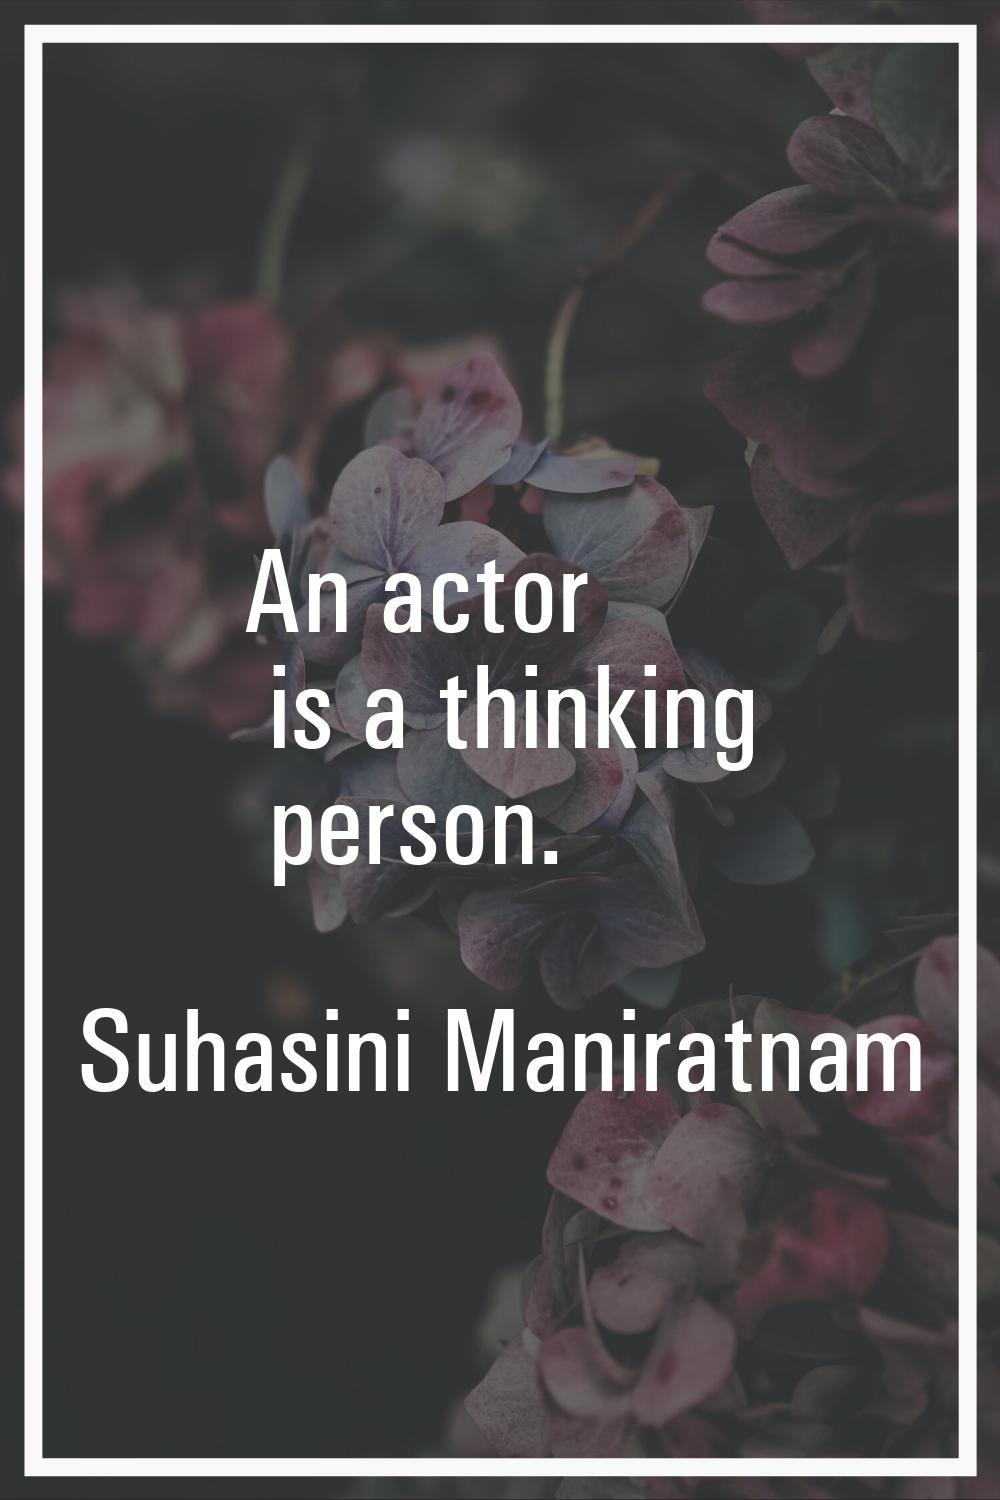 An actor is a thinking person.